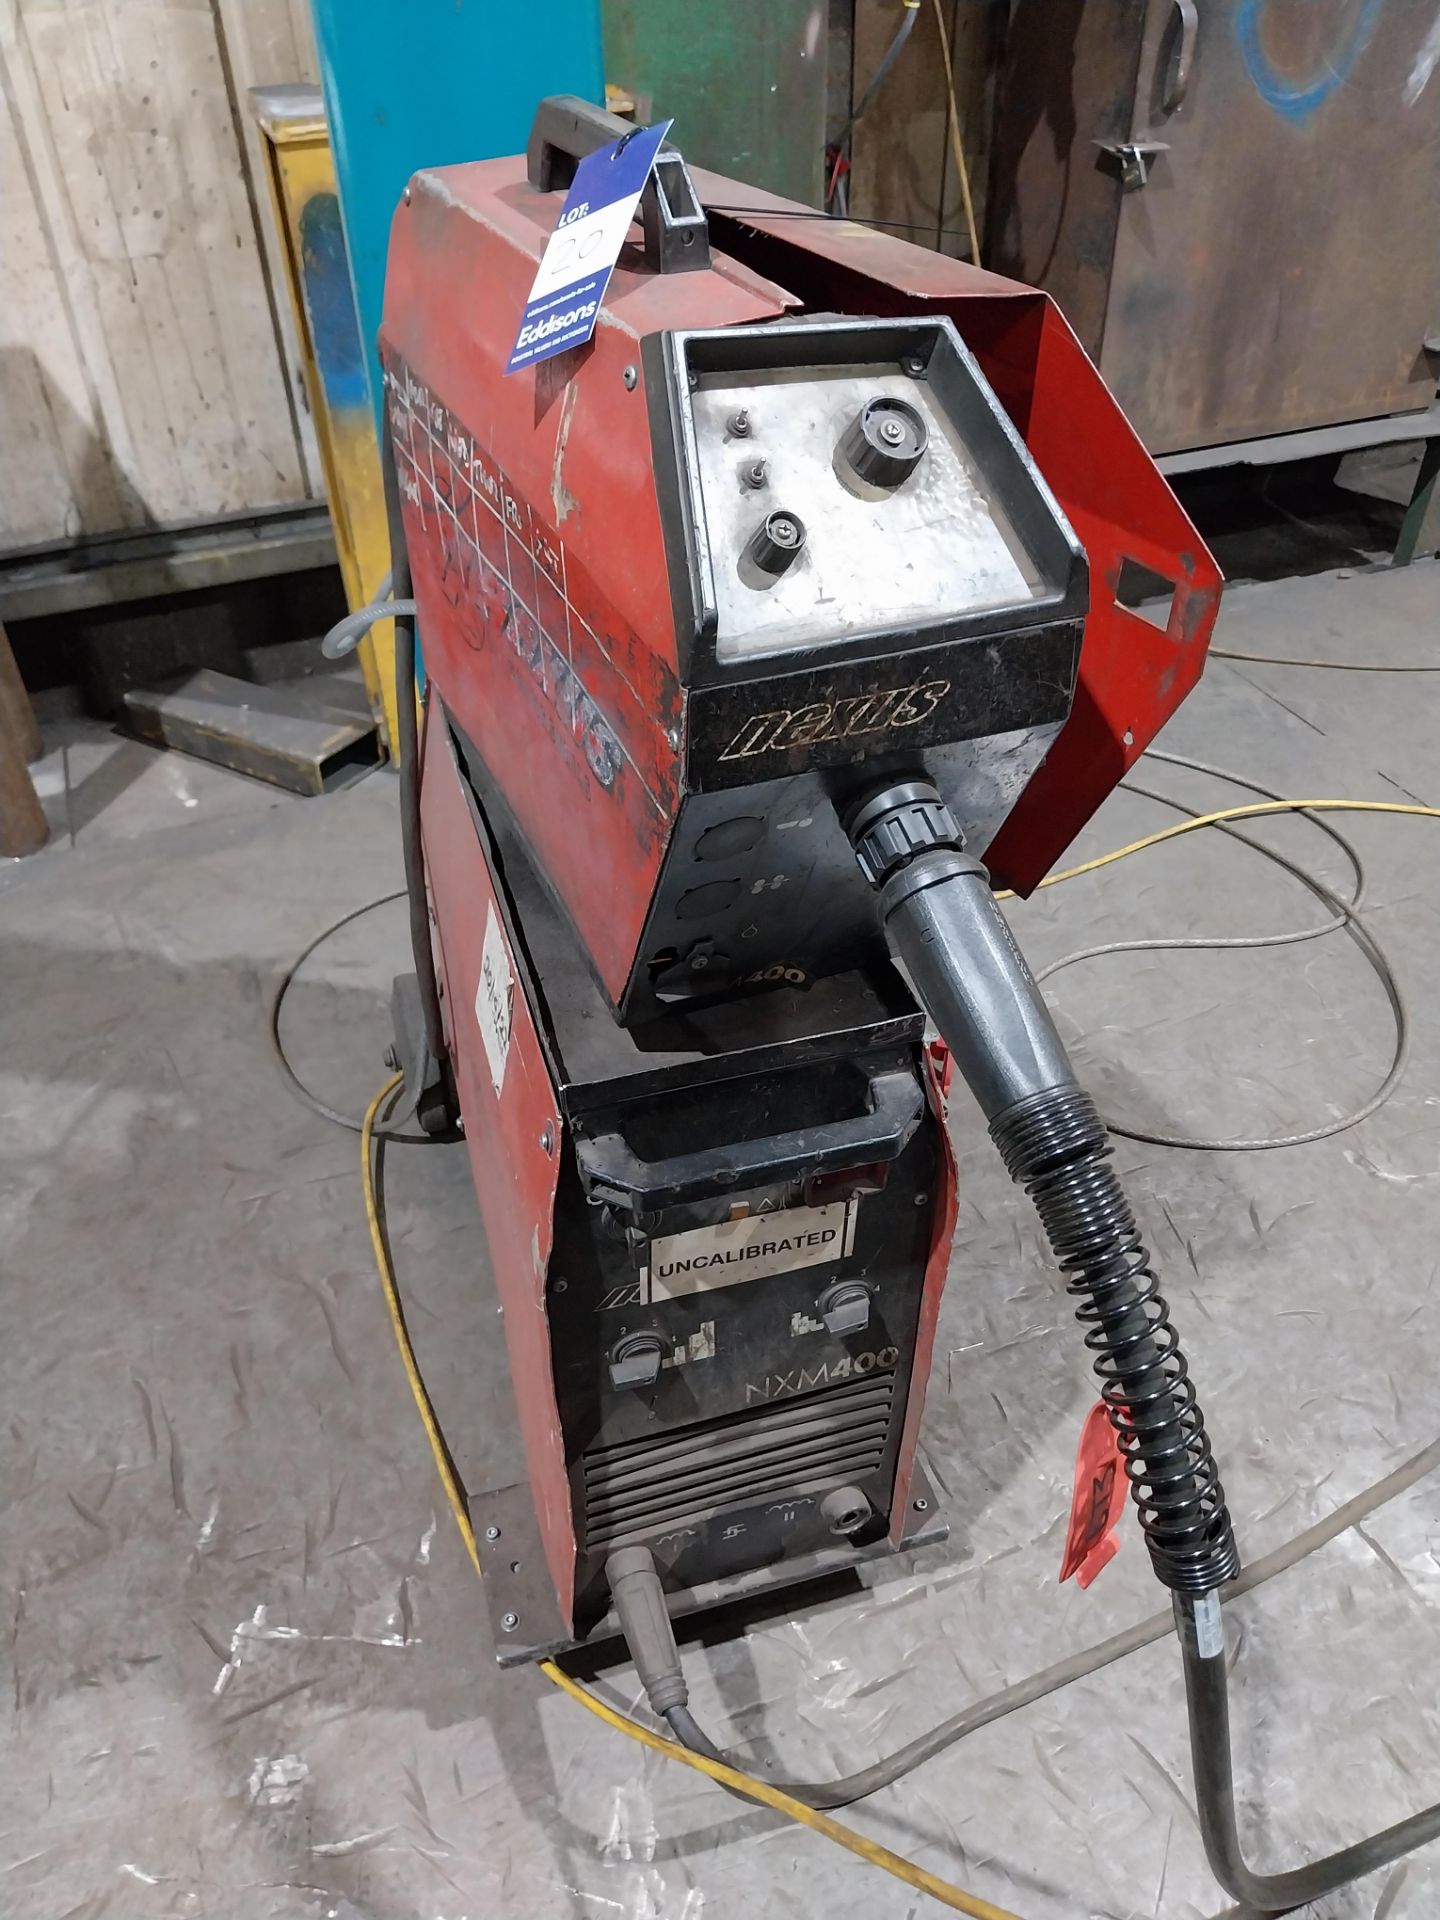 Nexus NXM400 mig welder and wire feed, torch and clamp (bottle not included) - Bild 3 aus 7